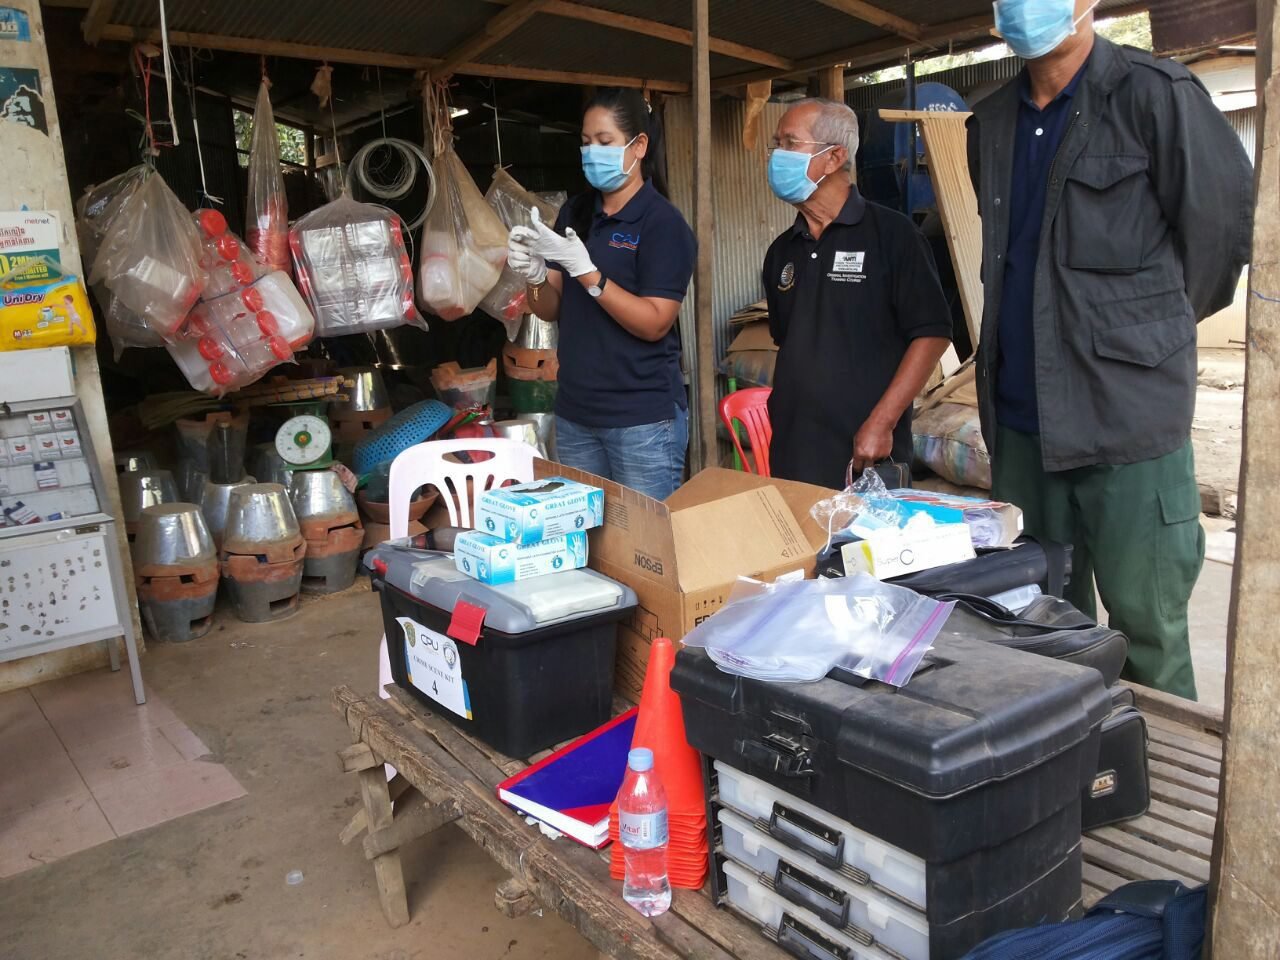 Cambodian officials prepare to inspect the perimeter of a nurse house after a local unlicensed doctor was charged with spreading HIV, in Roka commune in Battambang province, Cambodia, on Dec. 17, 2014. (EPA)